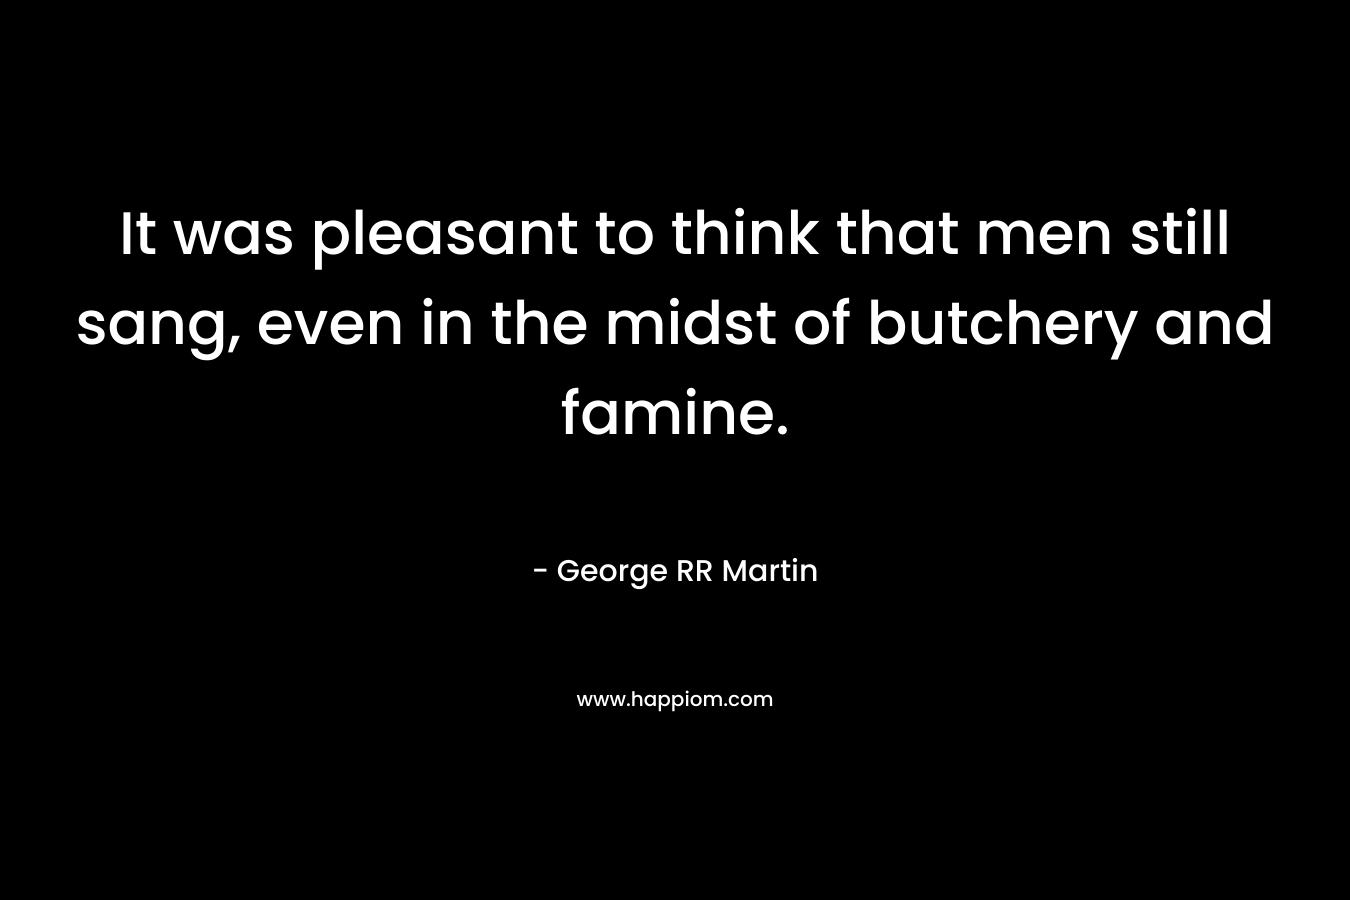 It was pleasant to think that men still sang, even in the midst of butchery and famine. – George RR Martin